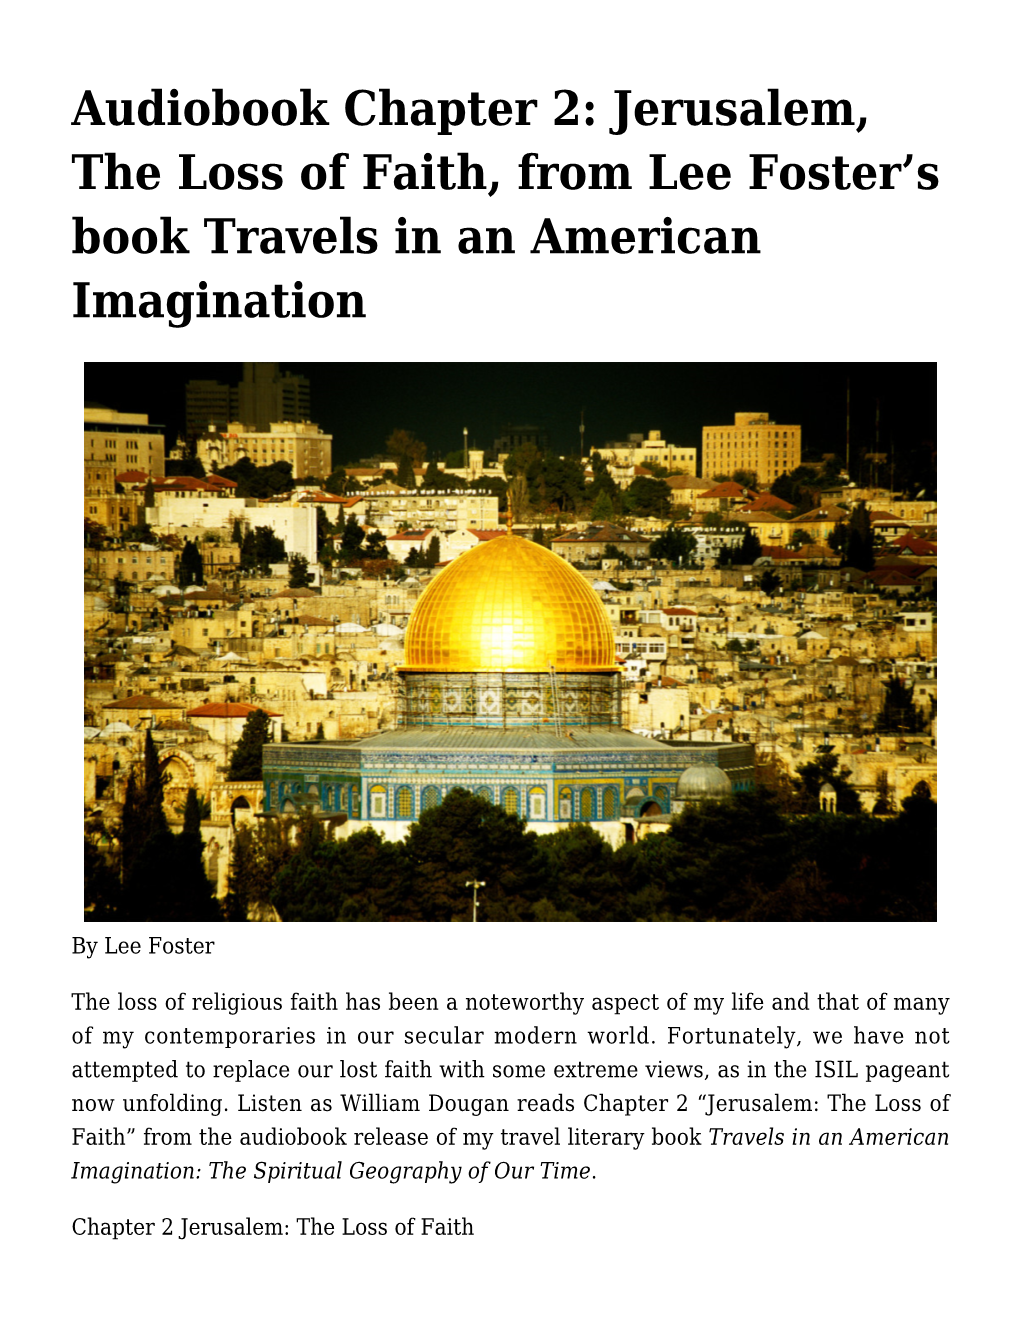 Audiobook Chapter 2: Jerusalem, the Loss of Faith, from Lee Foster's